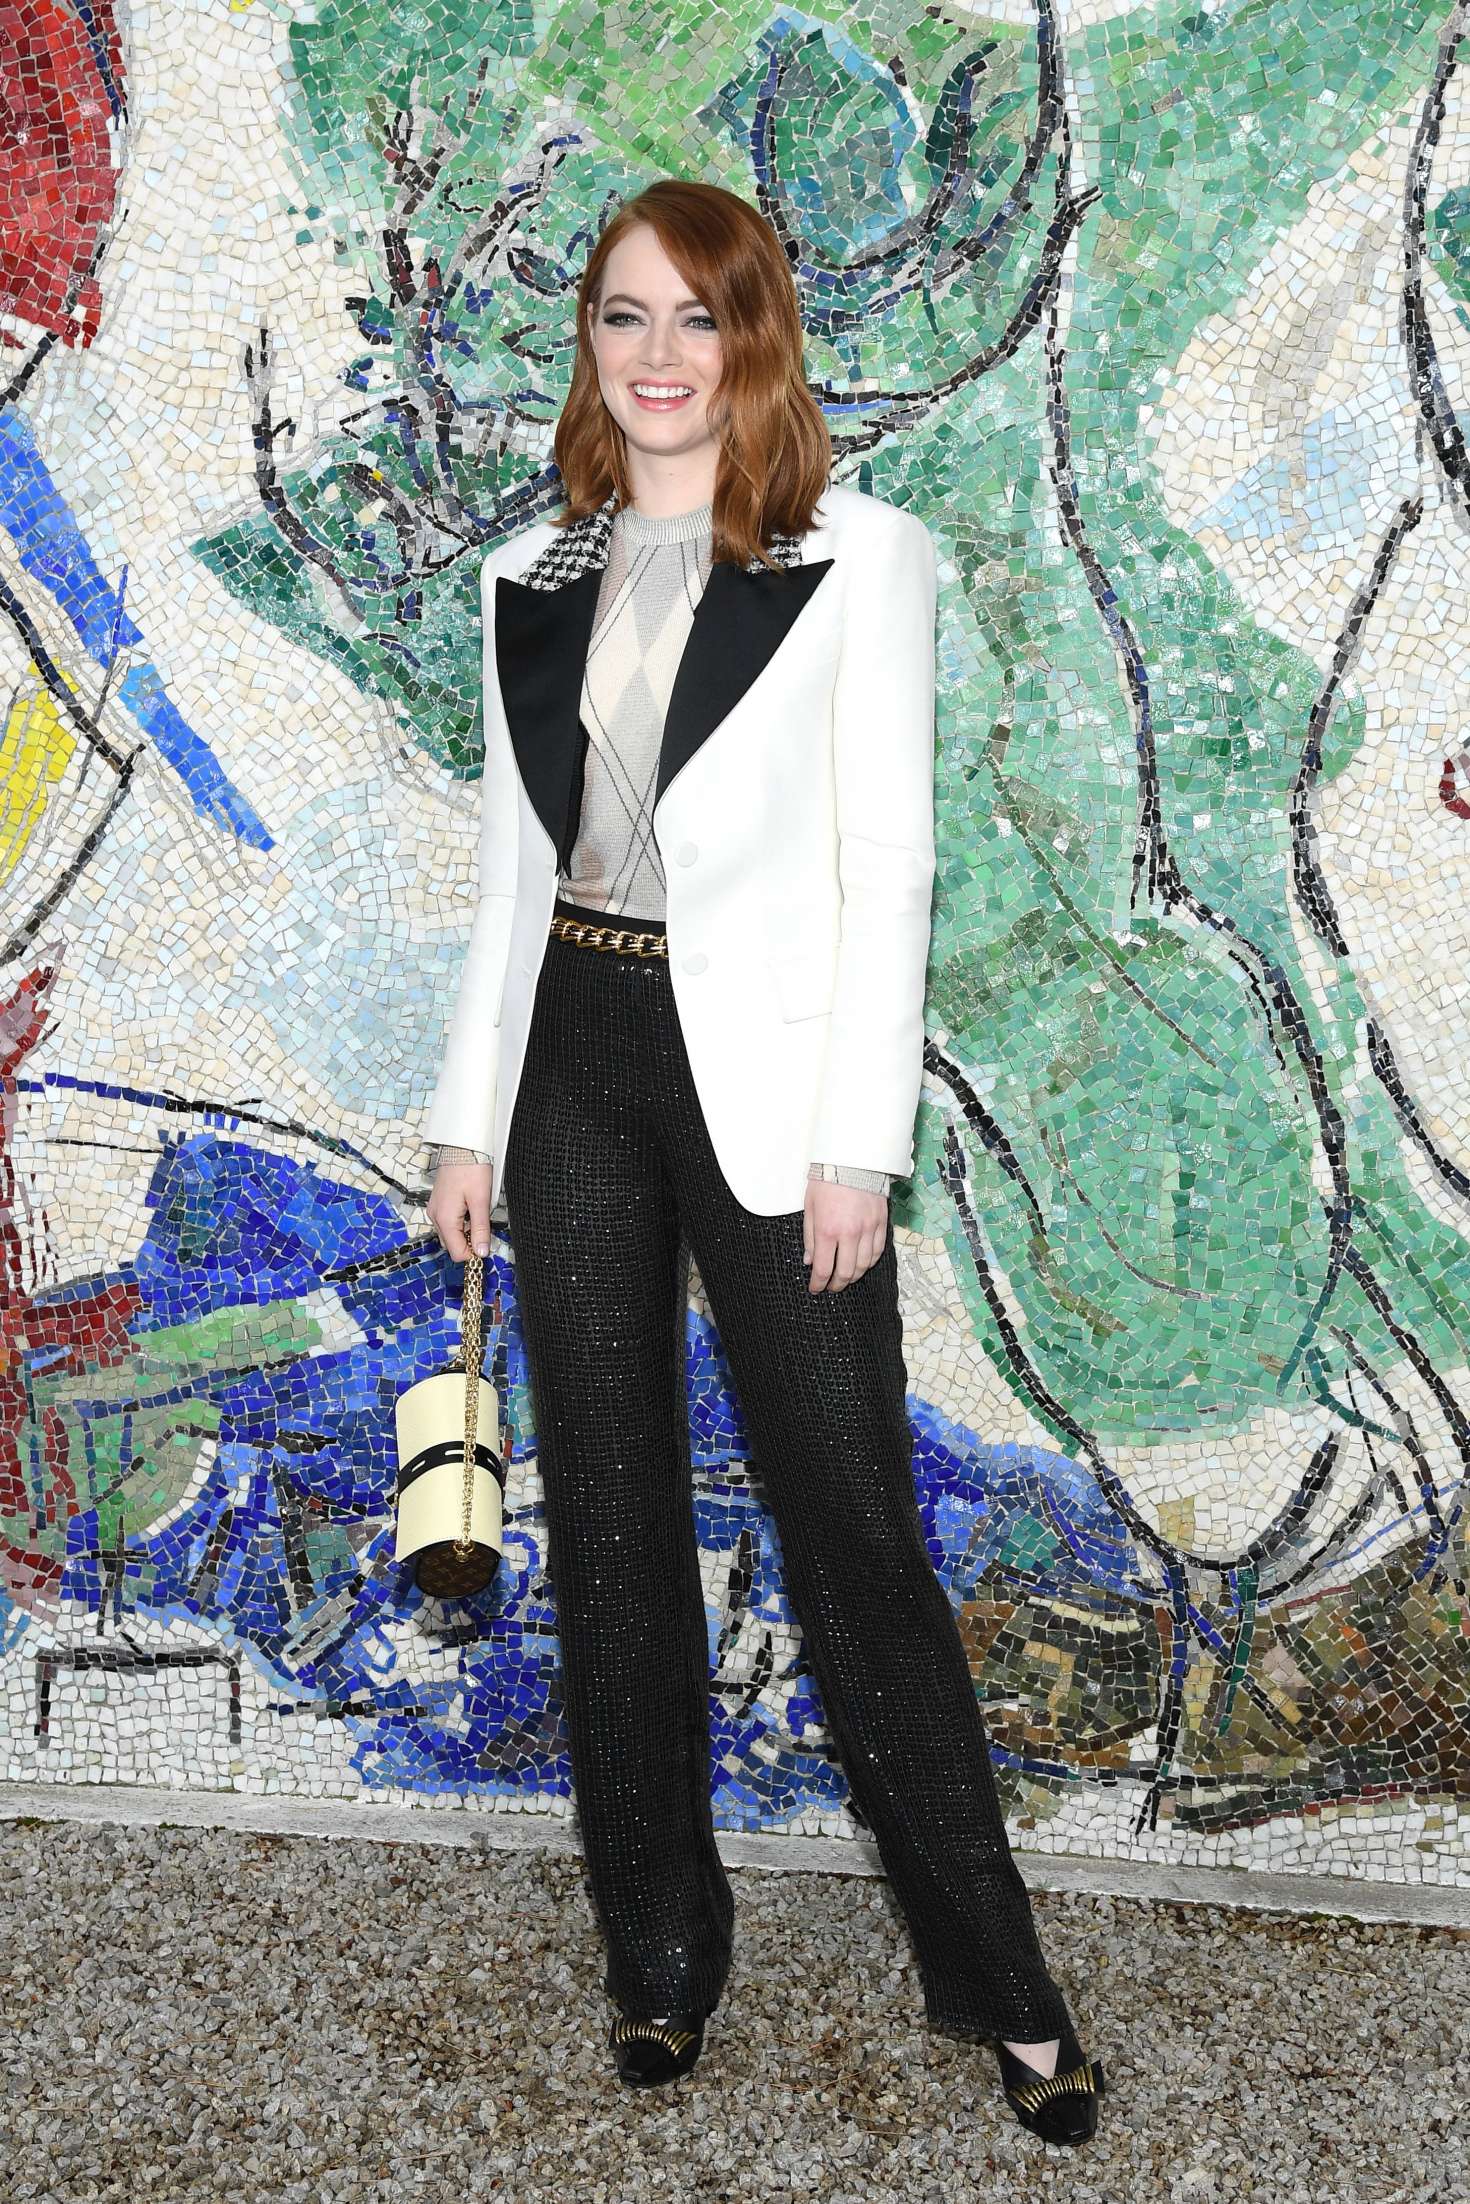 Emma Stone debuts her first campaign with luxury brand Louis Vuitton